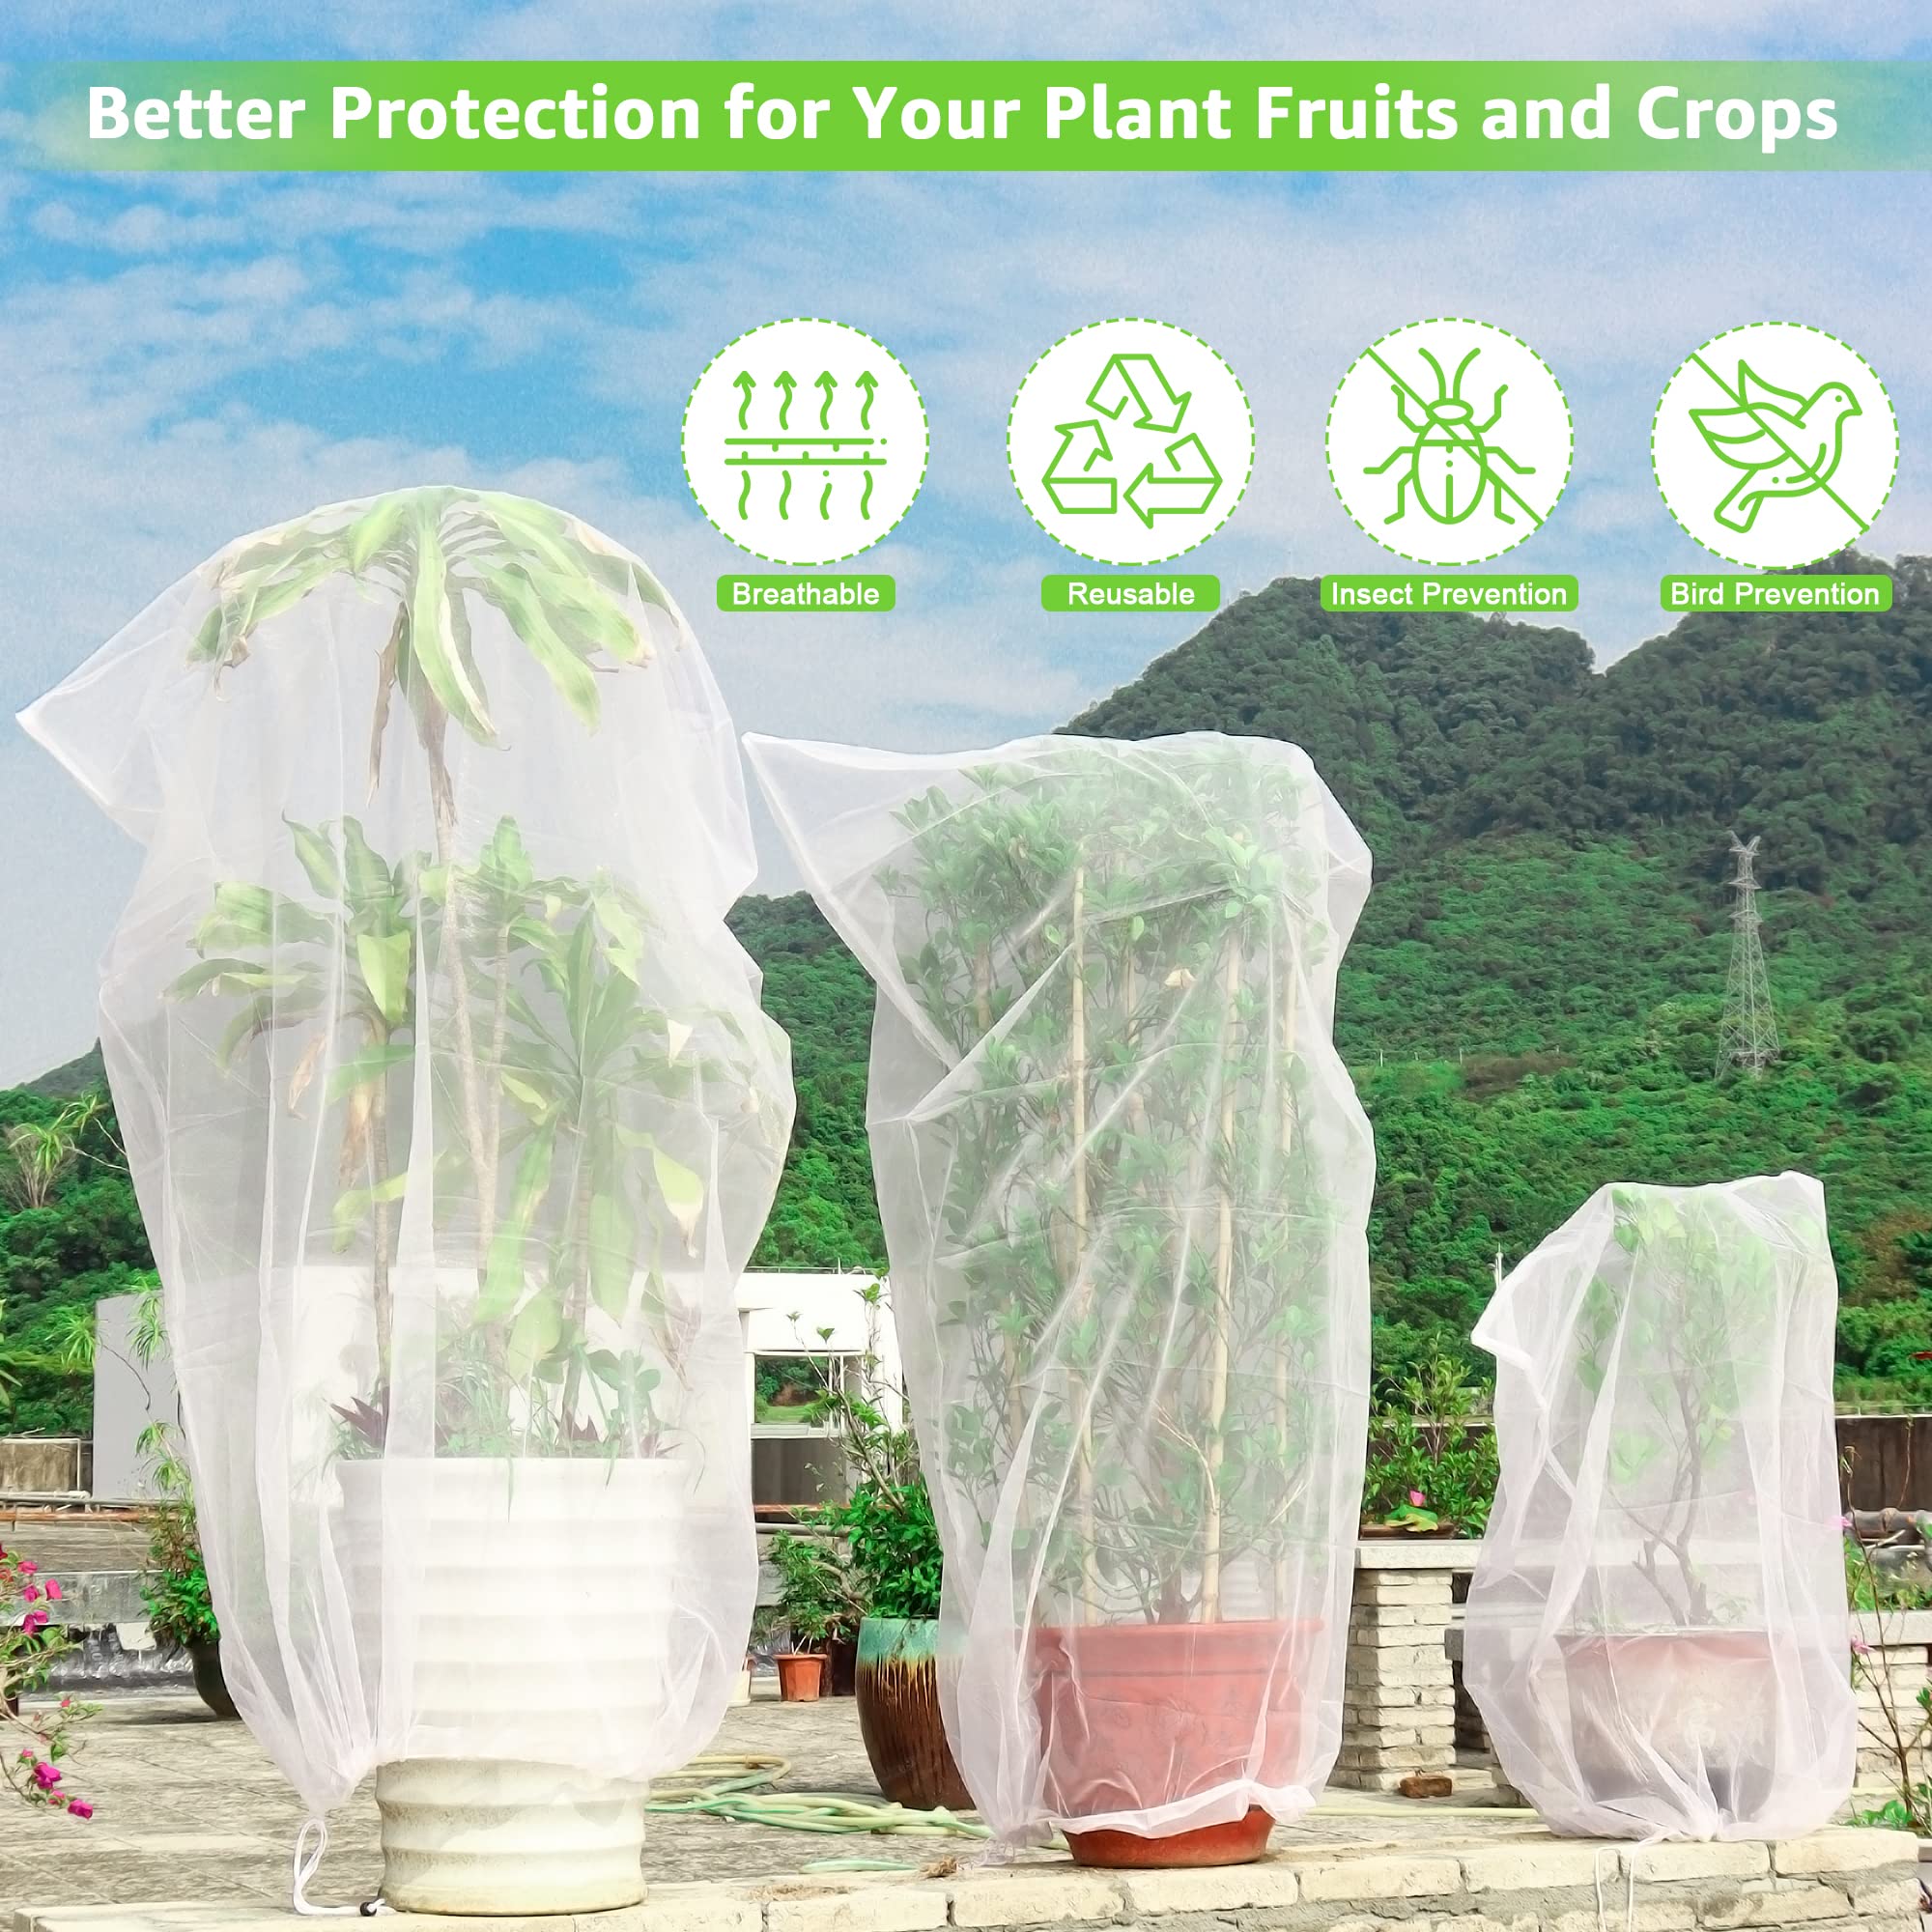 MIXC 6 Packs 3 Size Insect Netting Bag, Garden Bird Barrier Mesh Covers Bags With Drawstring, Bug Netting Plant Protection Covers Bags For Blueberry Tomato Vegetable Form Cicadas Bird Squirrels Eating